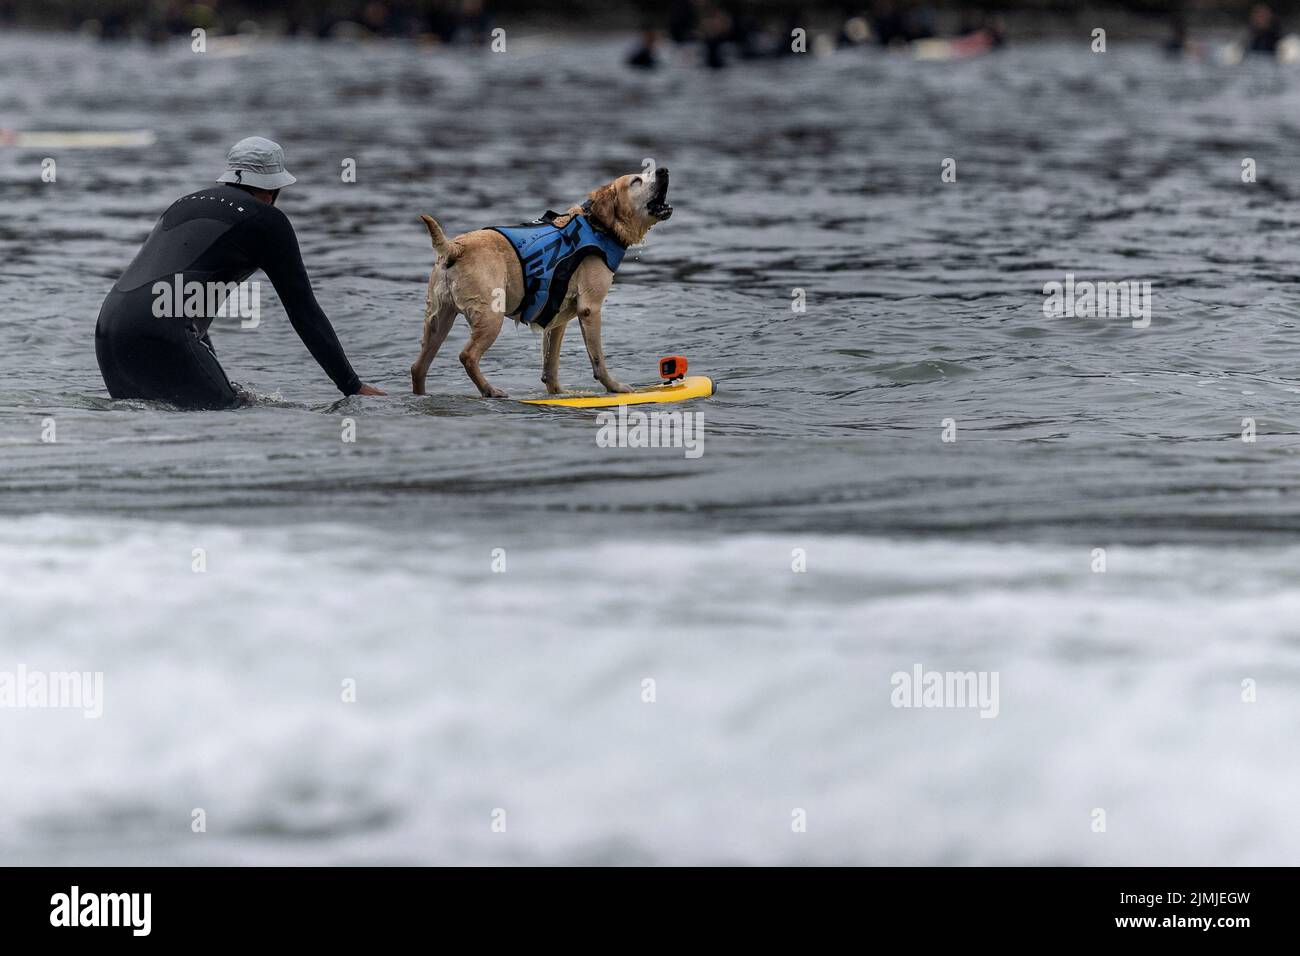 Charlie competes at the World Dog Surfing Championships in Pacifica, California, U.S., August 6, 2022. REUTERS/Carlos Barria Stock Photo